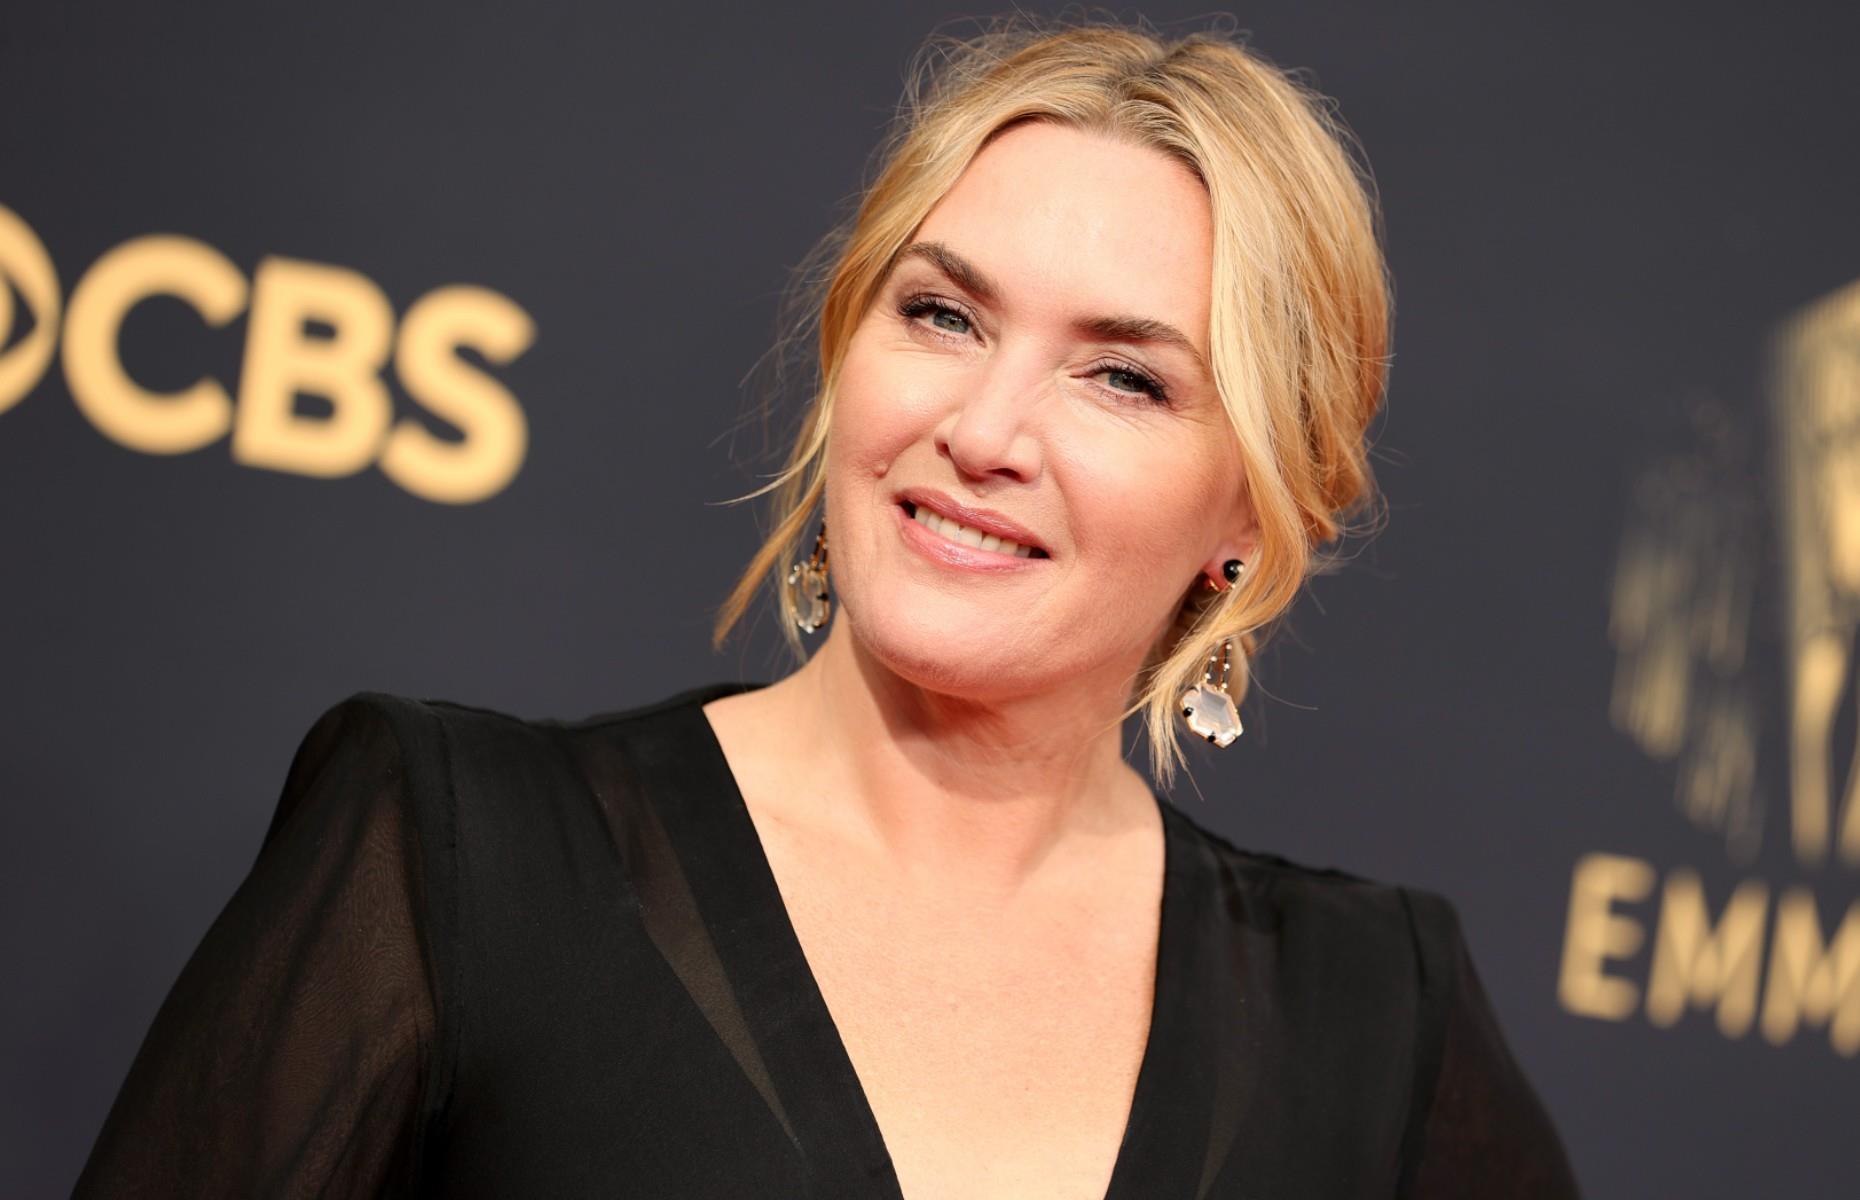 Kate Winslet worked in a deli